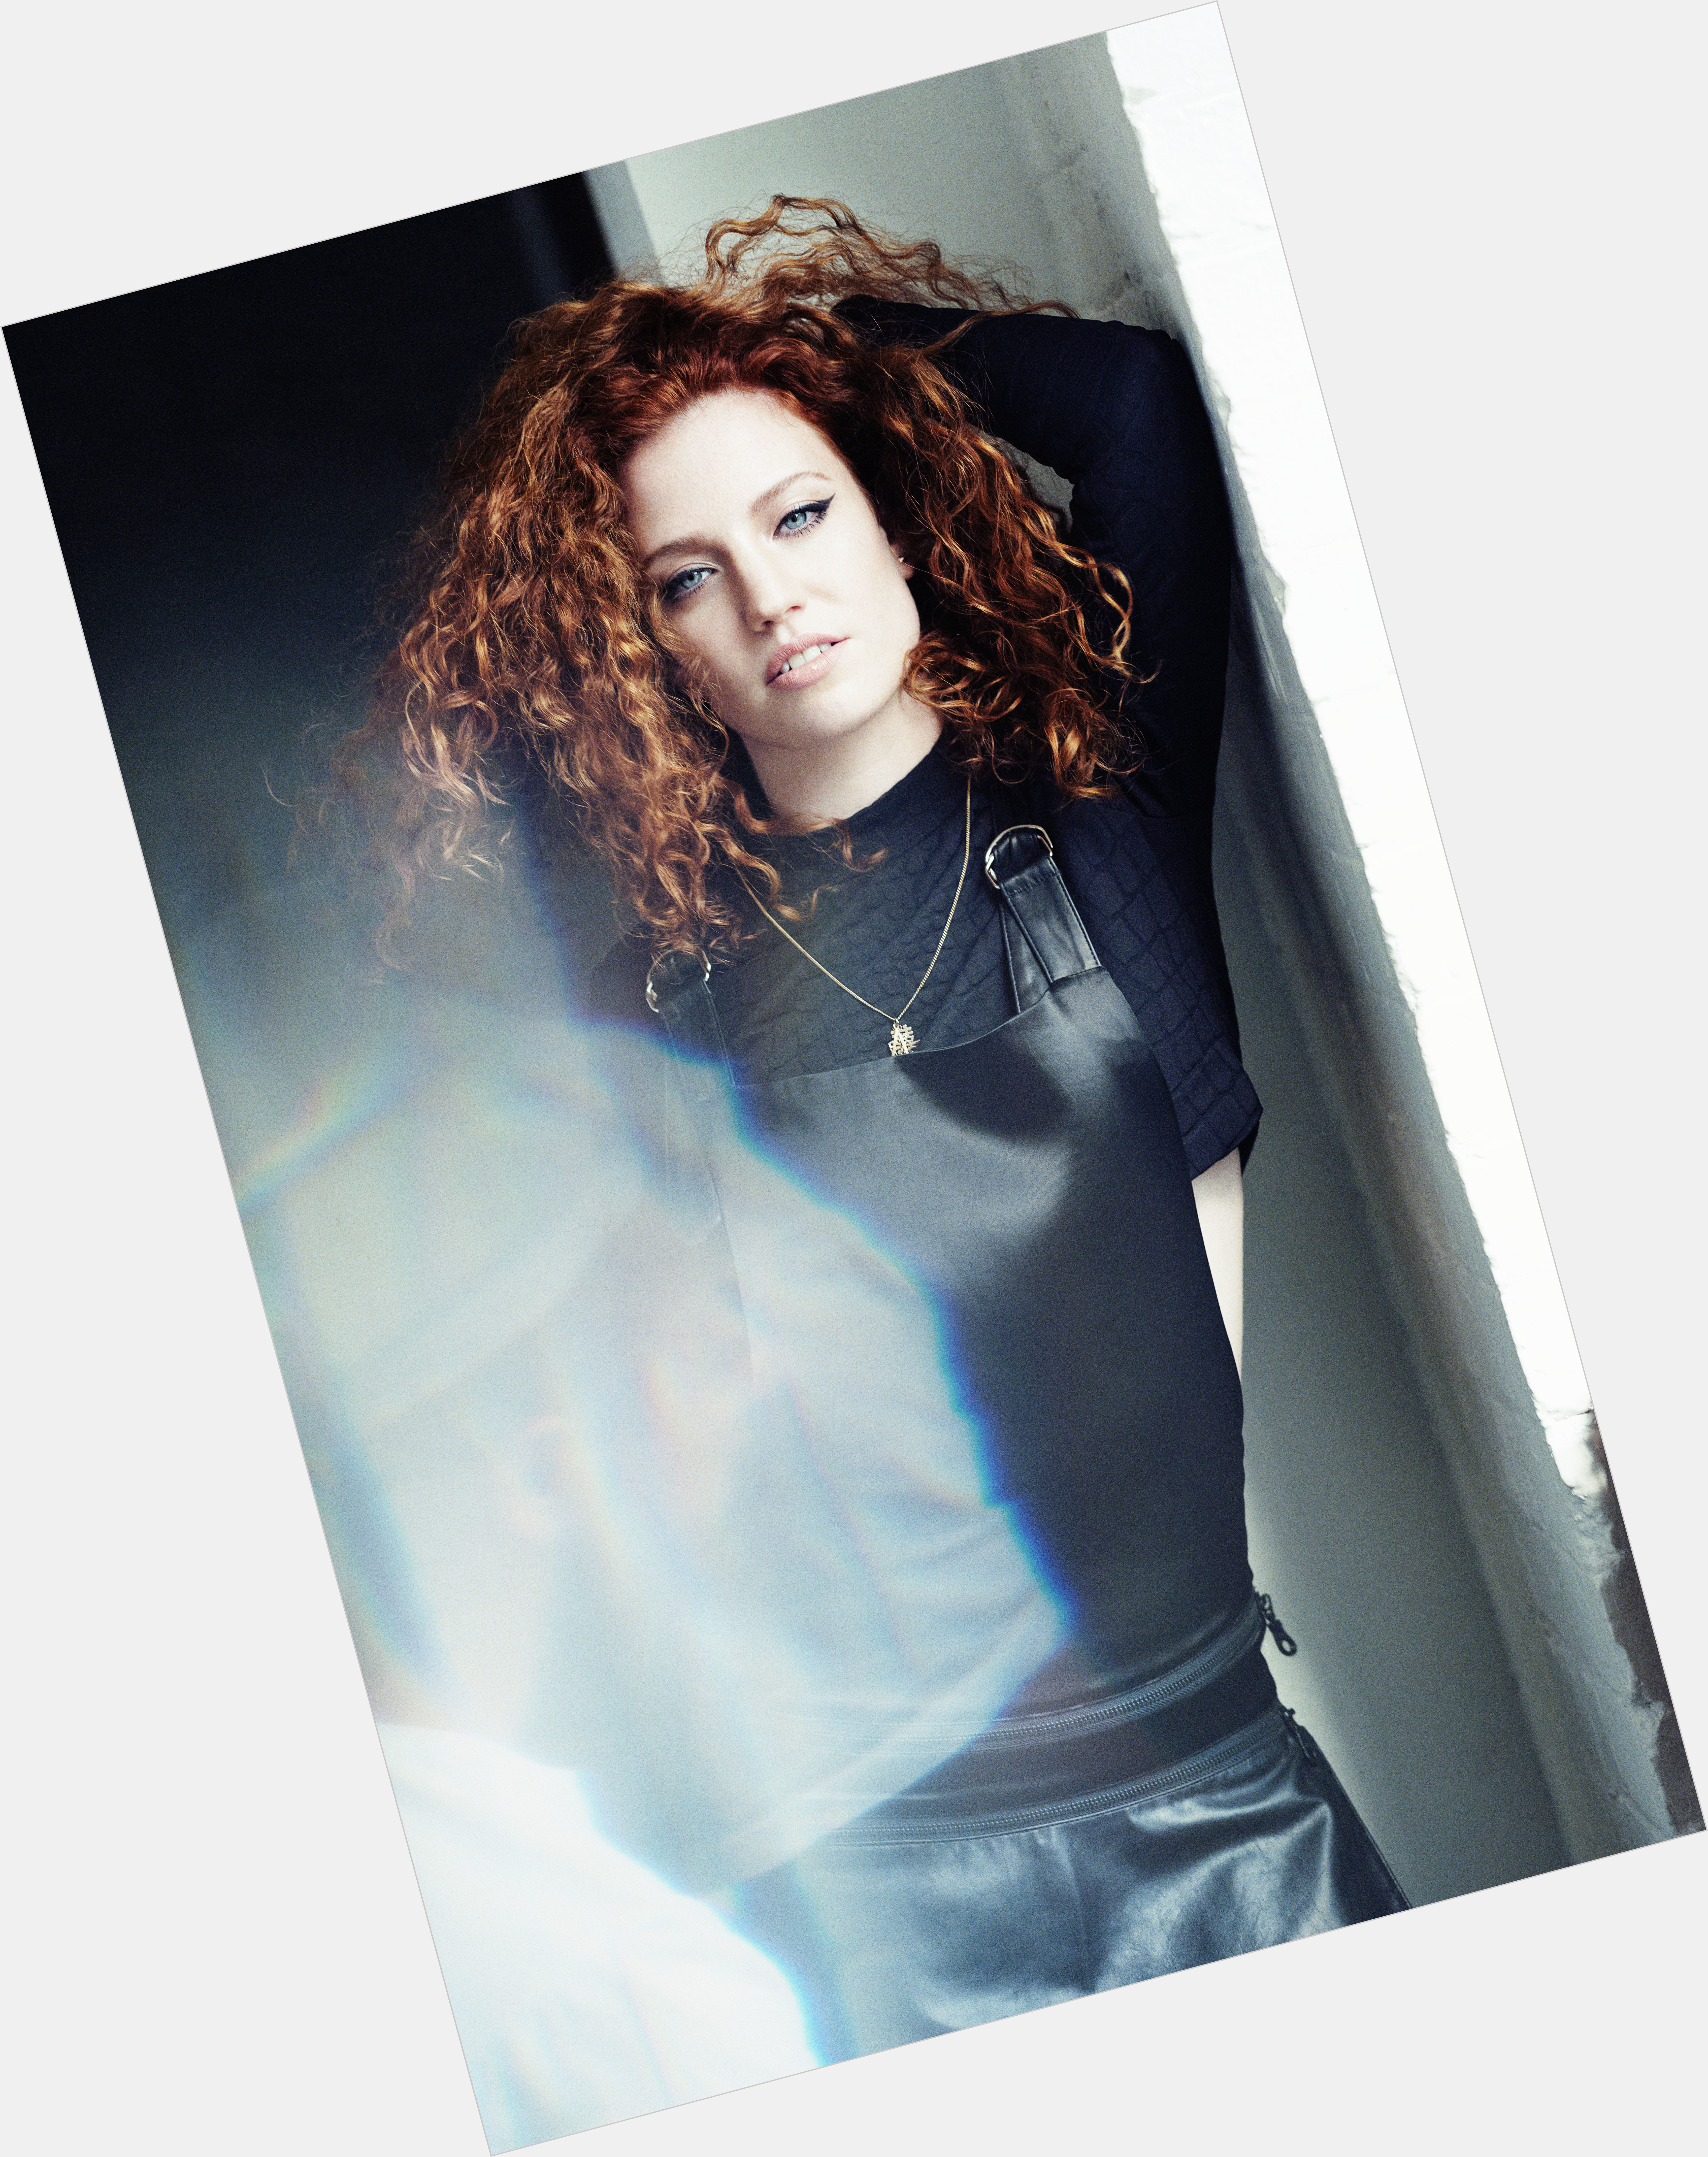 Jess Glynne Athletic body,  dyed red hair & hairstyles